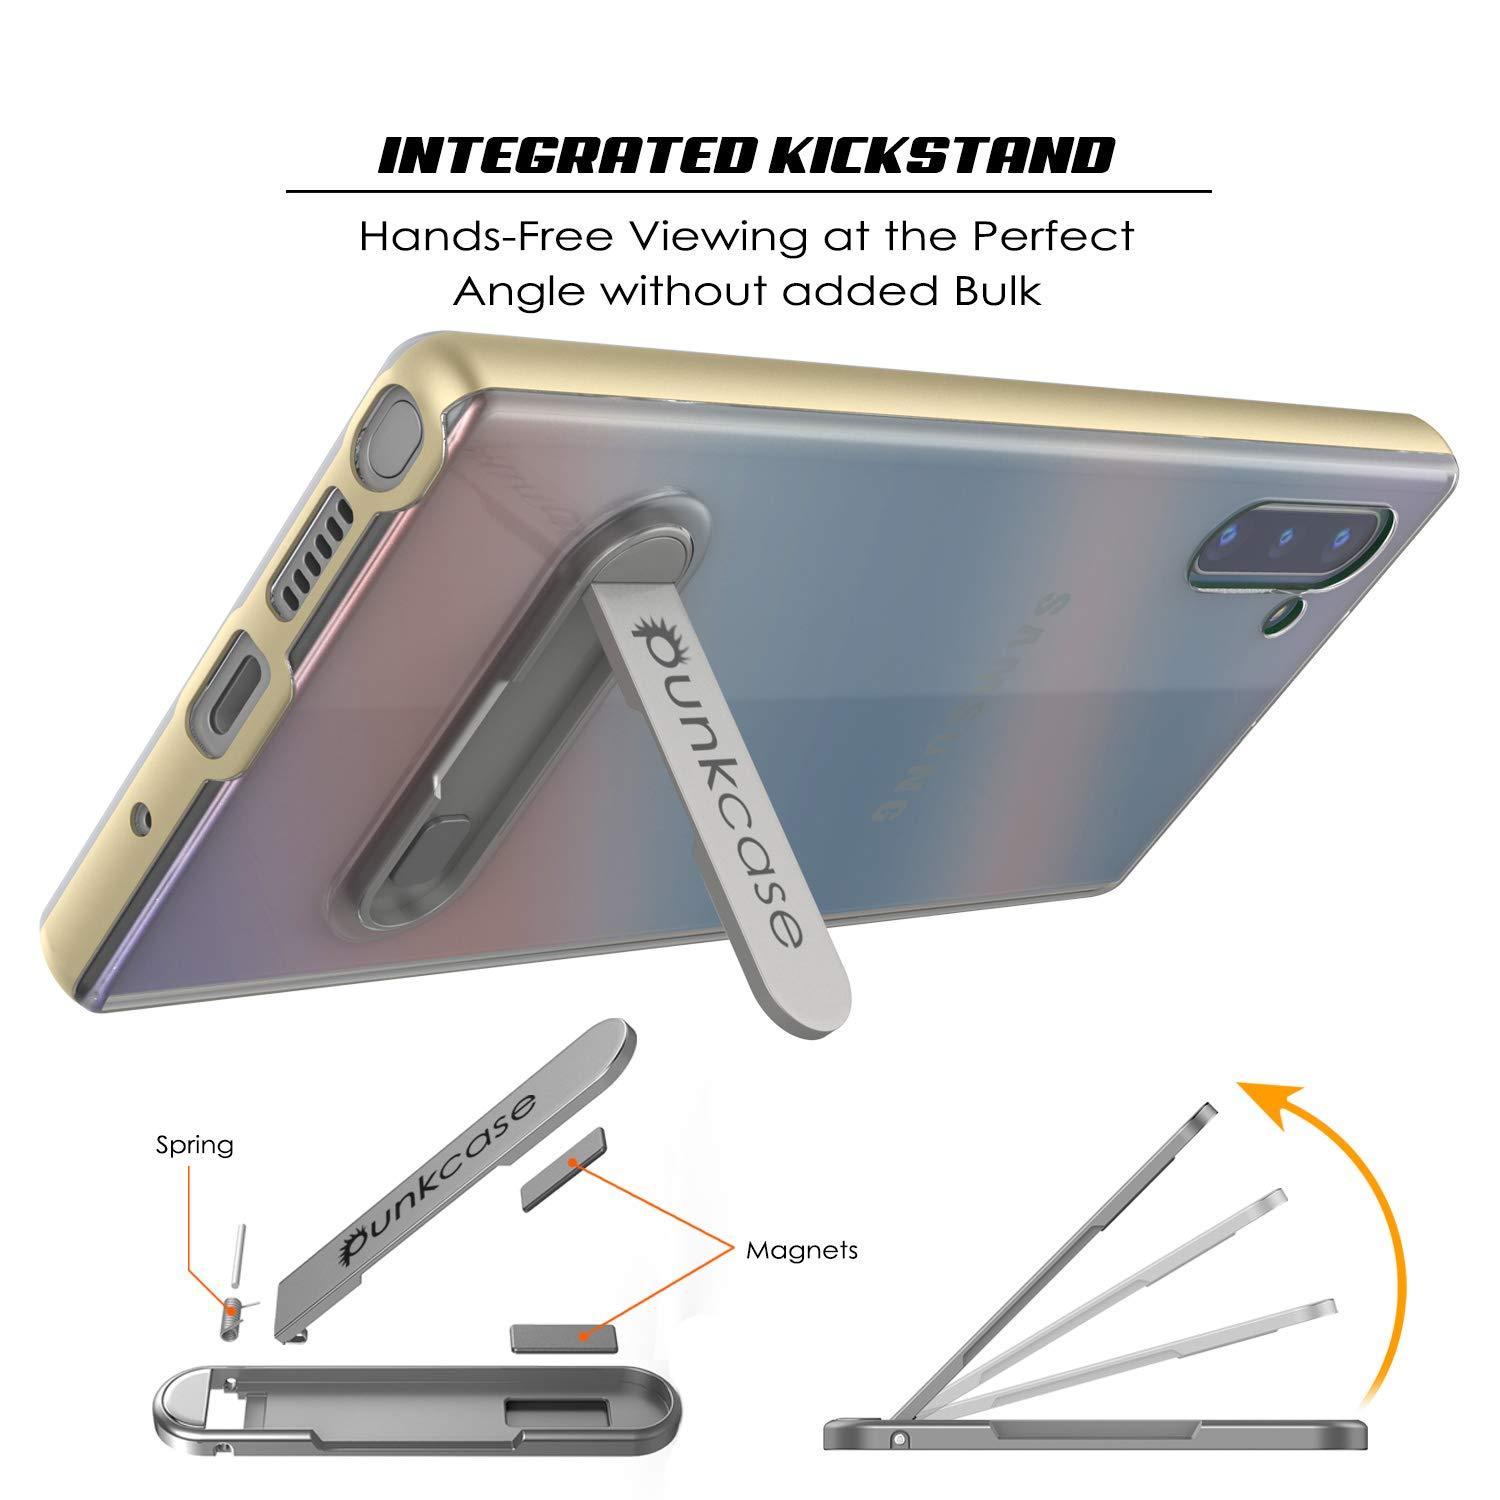 Galaxy Note 10 Lucid 3.0 PunkCase Armor Cover w/Integrated Kickstand and Screen Protector [Gold]